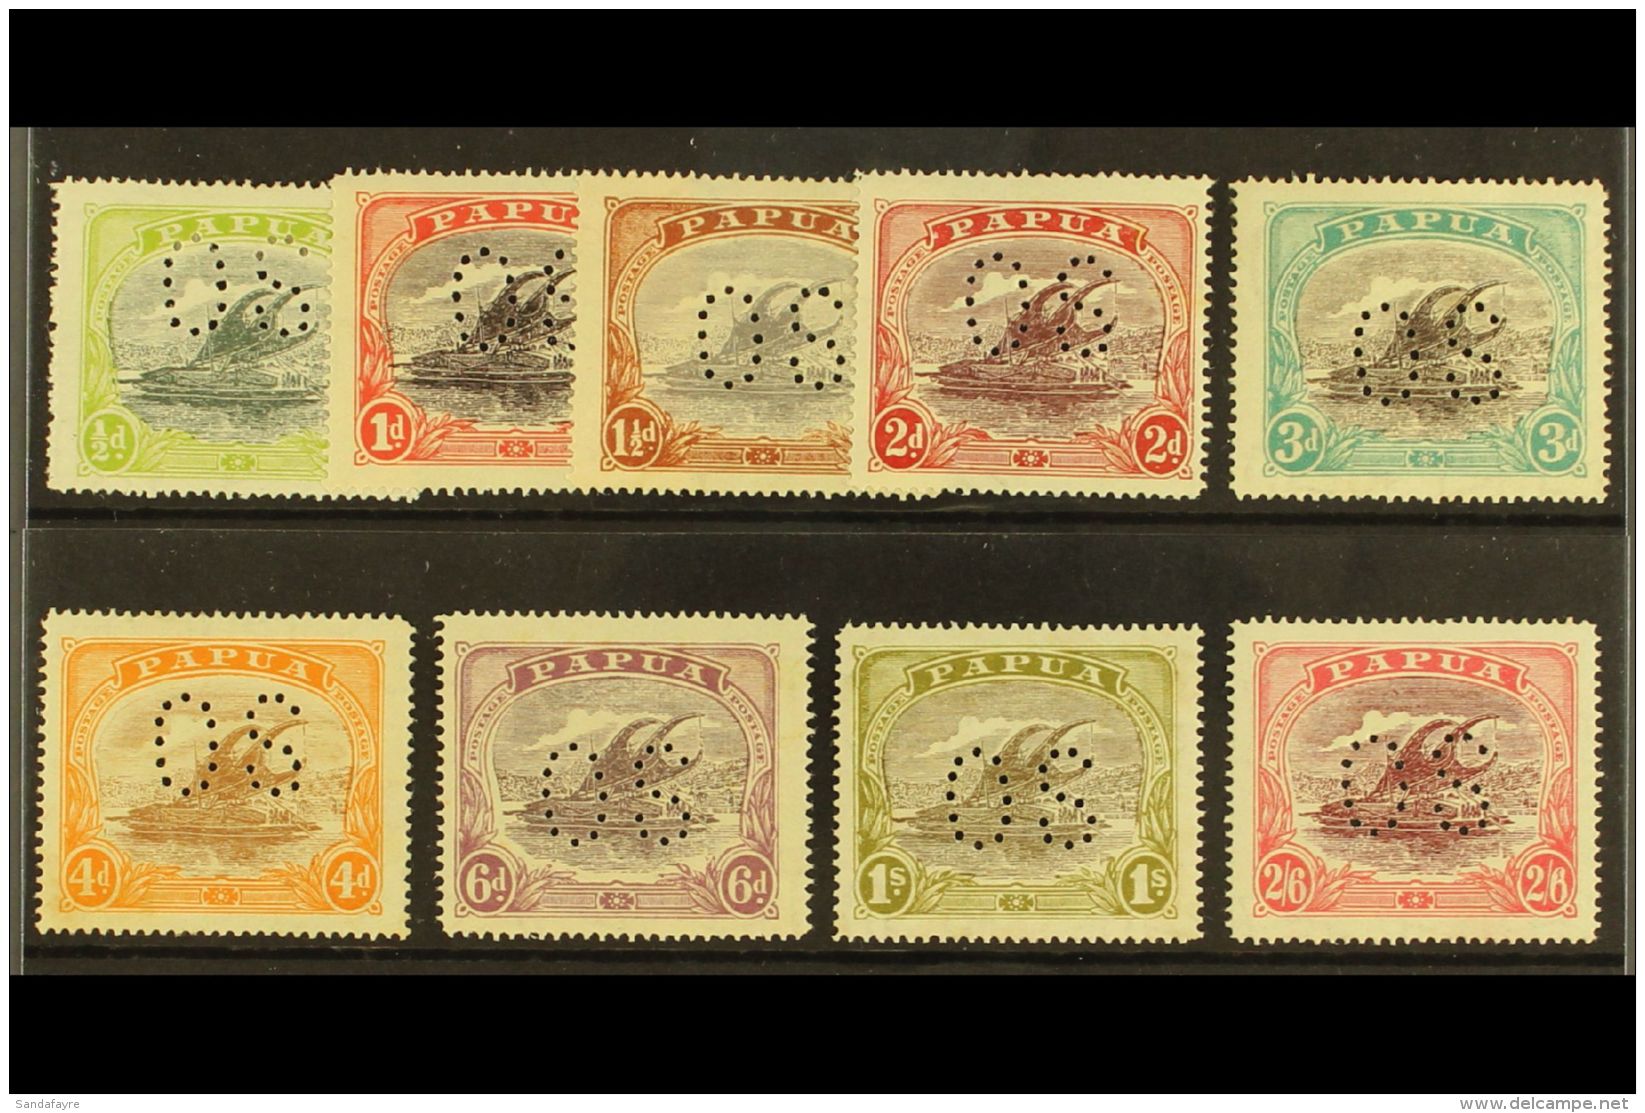 OFFICIAL 1930 Complete Set, SG O46/54, Fine Mint, Couple Of Values With Tone Spots On Gum. (9 Stamps) For More... - Papua New Guinea